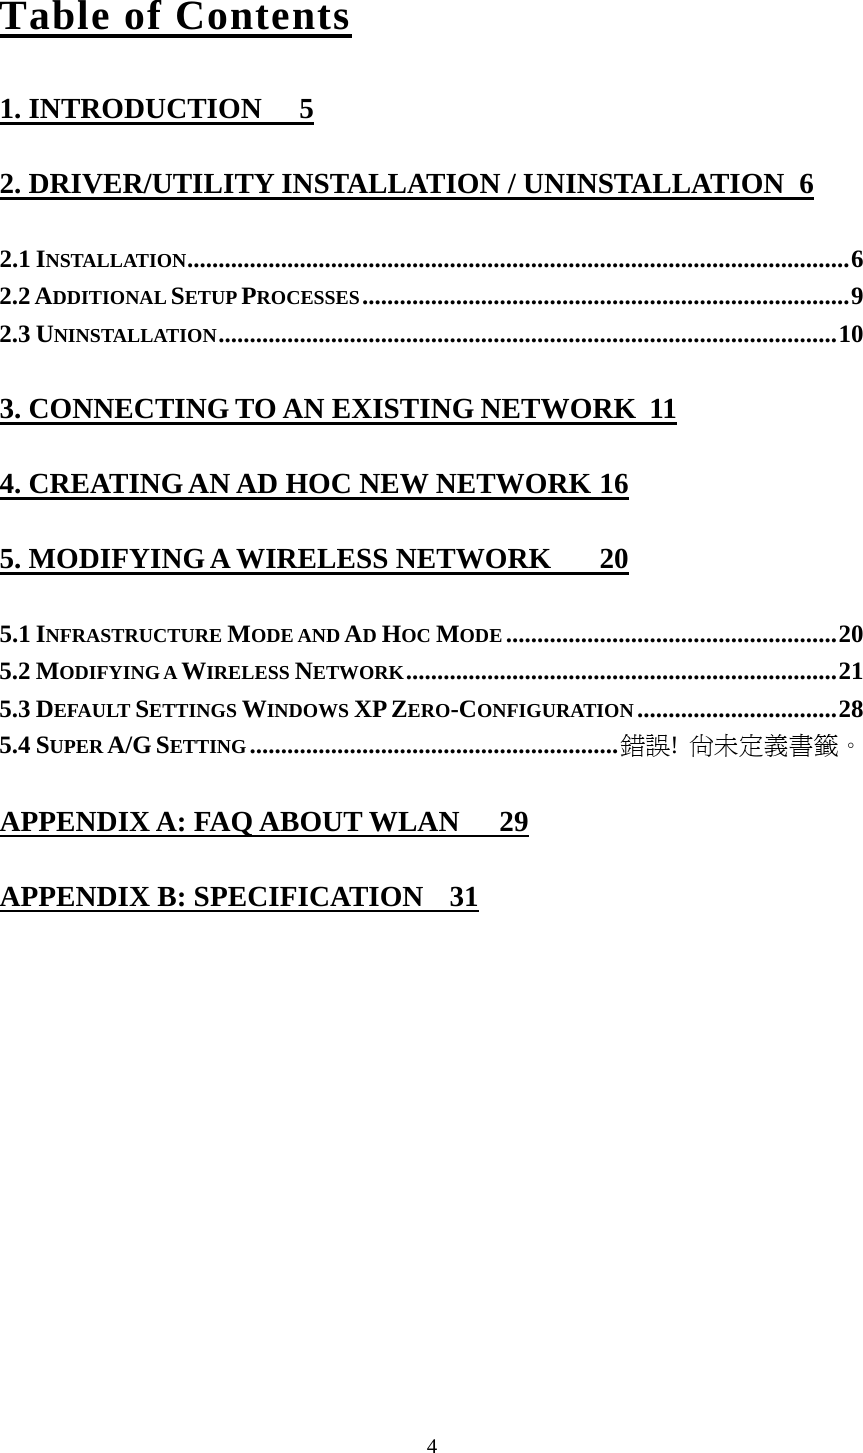  4Table of Contents 1. INTRODUCTION  5 2. DRIVER/UTILITY INSTALLATION / UNINSTALLATION  6 2.1 INSTALLATION..........................................................................................................6 2.2 ADDITIONAL SETUP PROCESSES..............................................................................9 2.3 UNINSTALLATION...................................................................................................10 3. CONNECTING TO AN EXISTING NETWORK  11 4. CREATING AN AD HOC NEW NETWORK 16 5. MODIFYING A WIRELESS NETWORK  20 5.1 INFRASTRUCTURE MODE AND AD HOC MODE .....................................................20 5.2 MODIFYING A WIRELESS NETWORK.....................................................................21 5.3 DEFAULT SETTINGS WINDOWS XP ZERO-CONFIGURATION ................................28 5.4 SUPER A/G SETTING...........................................................錯誤! 尚未定義書籤。 APPENDIX A: FAQ ABOUT WLAN  29 APPENDIX B: SPECIFICATION  31 